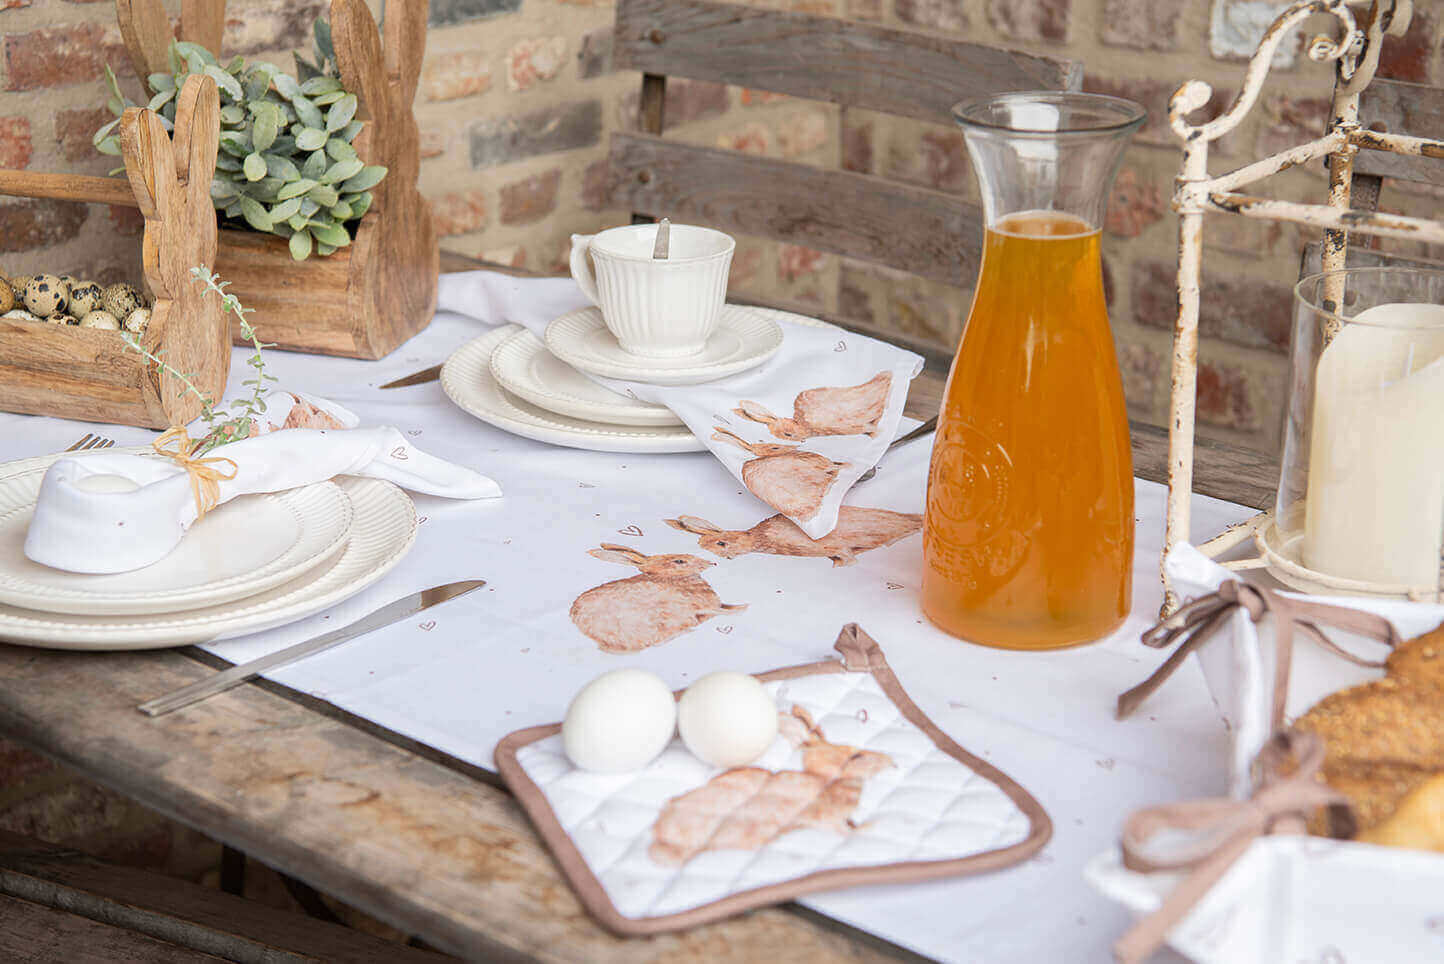 A rustic table setting with a countryside feel. On the table lies a white tablecloth adorned with playful rabbit illustrations. Cream-colored dinnerware is visible, featuring a subtle ribbed pattern along the edges. The napkins are neatly rolled and tied with a graceful string, placed on the plates. A coffee cup is stacked atop a matching saucer, evoking the inviting atmosphere of a coffee break.

Adjacent to the dinnerware sits a clear pitcher filled with orange liquid, radiating a refreshing vibe. A decorative, weathered metal candle holder with a large candle inside contributes to the cozy ambiance. On the left side of the table stands a wooden centerpiece adorned with inlaid quail eggs beside a pot of vibrant green plants.

The scene exudes a simple yet sophisticated atmosphere, perfect for a relaxed Easter breakfast or brunch outdoors. The rustic wooden furniture and brick wall in the background add to the charming, countryside appeal of the photo.